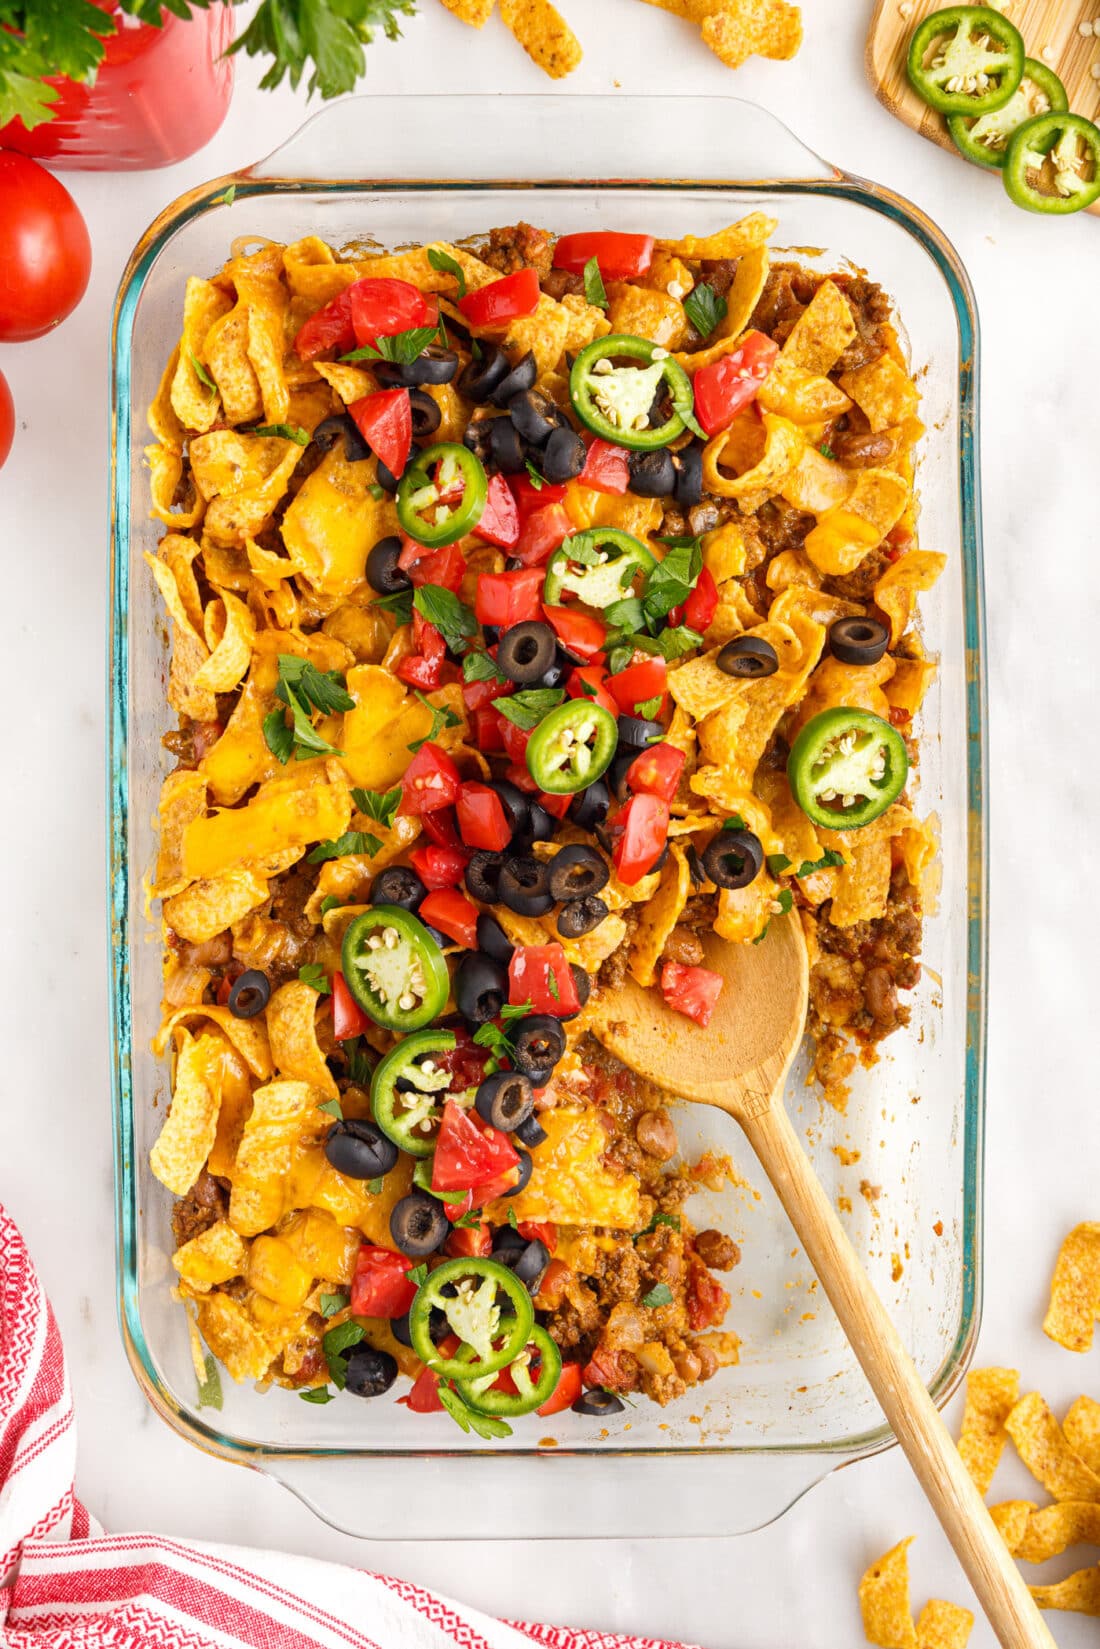 Frito Pie with wooden spoon